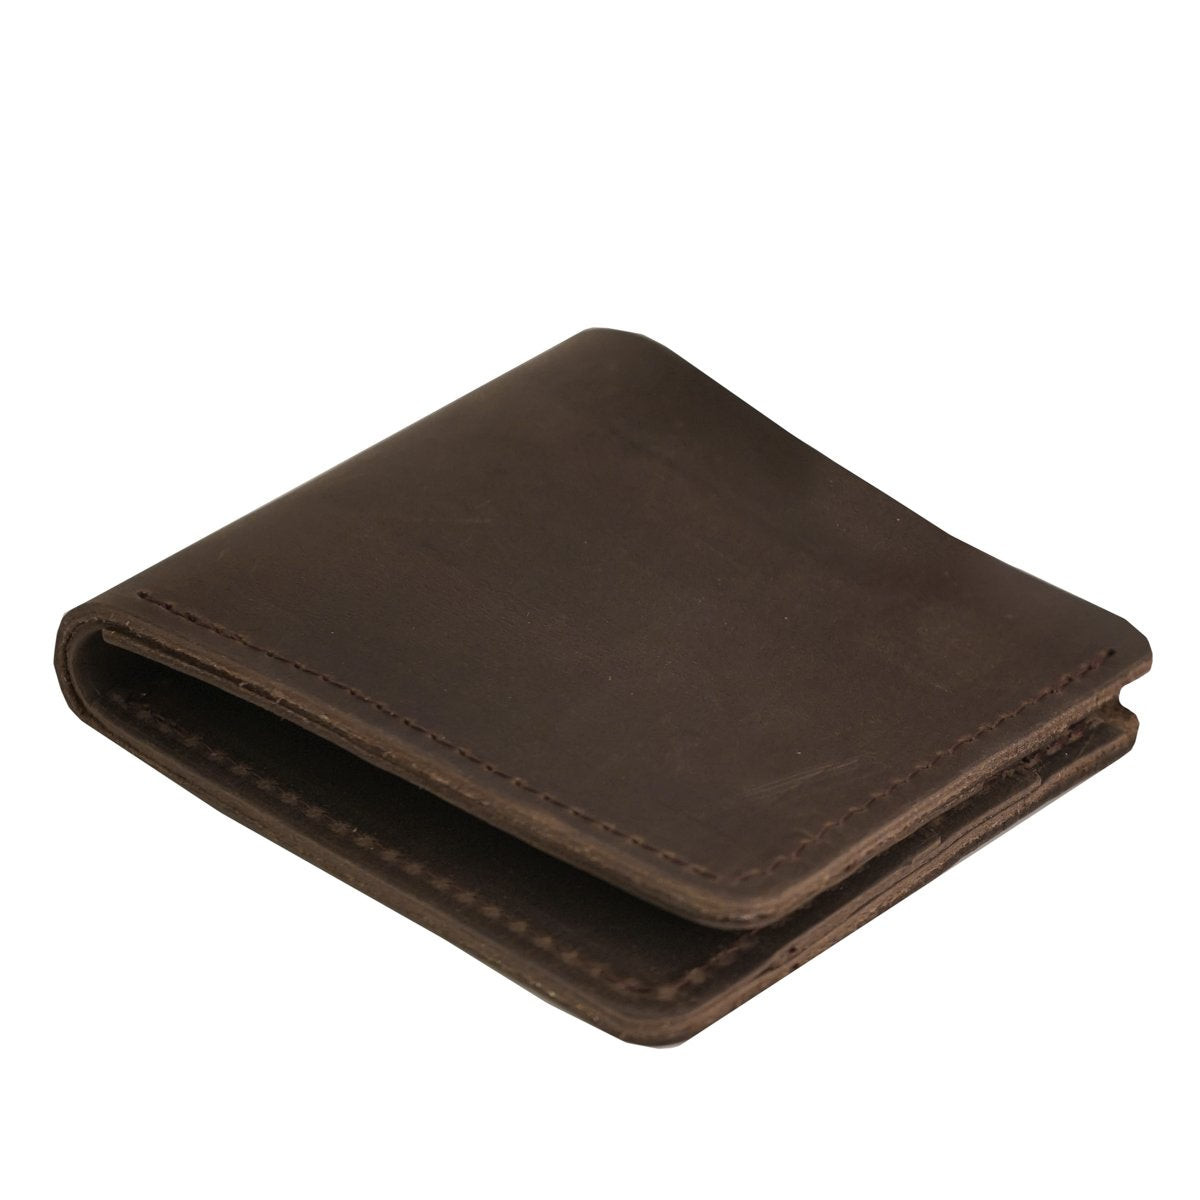 Rustico AC0117-0001 Rover Slim Leather Wallet for Unisex, Dark Brown